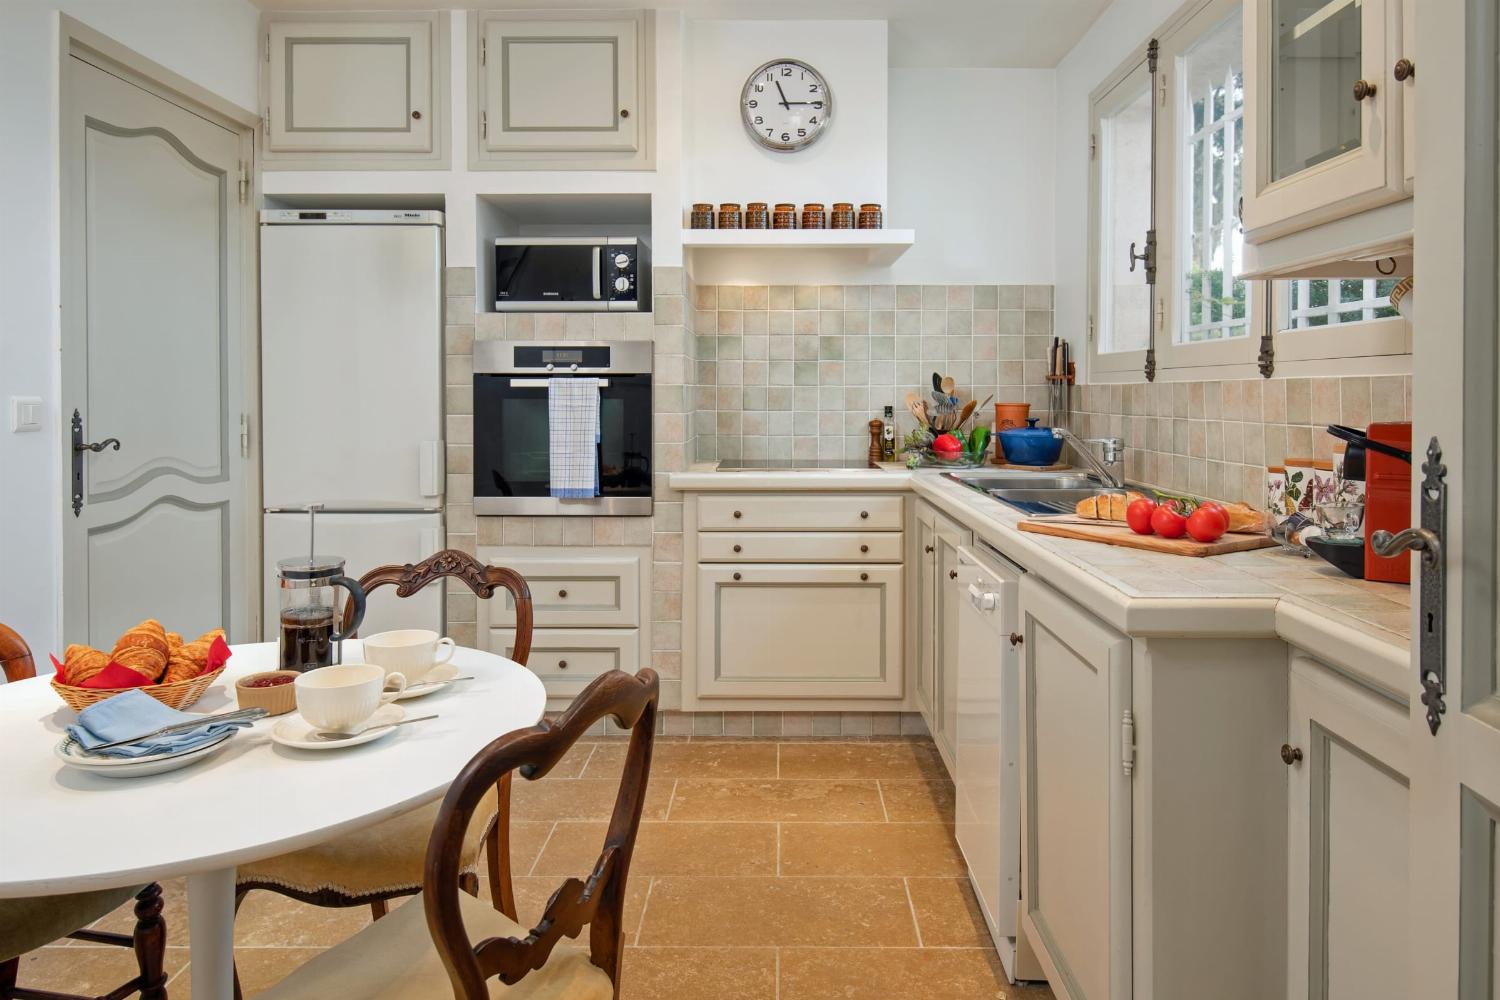 Kitchen | Holiday apartment in Provence